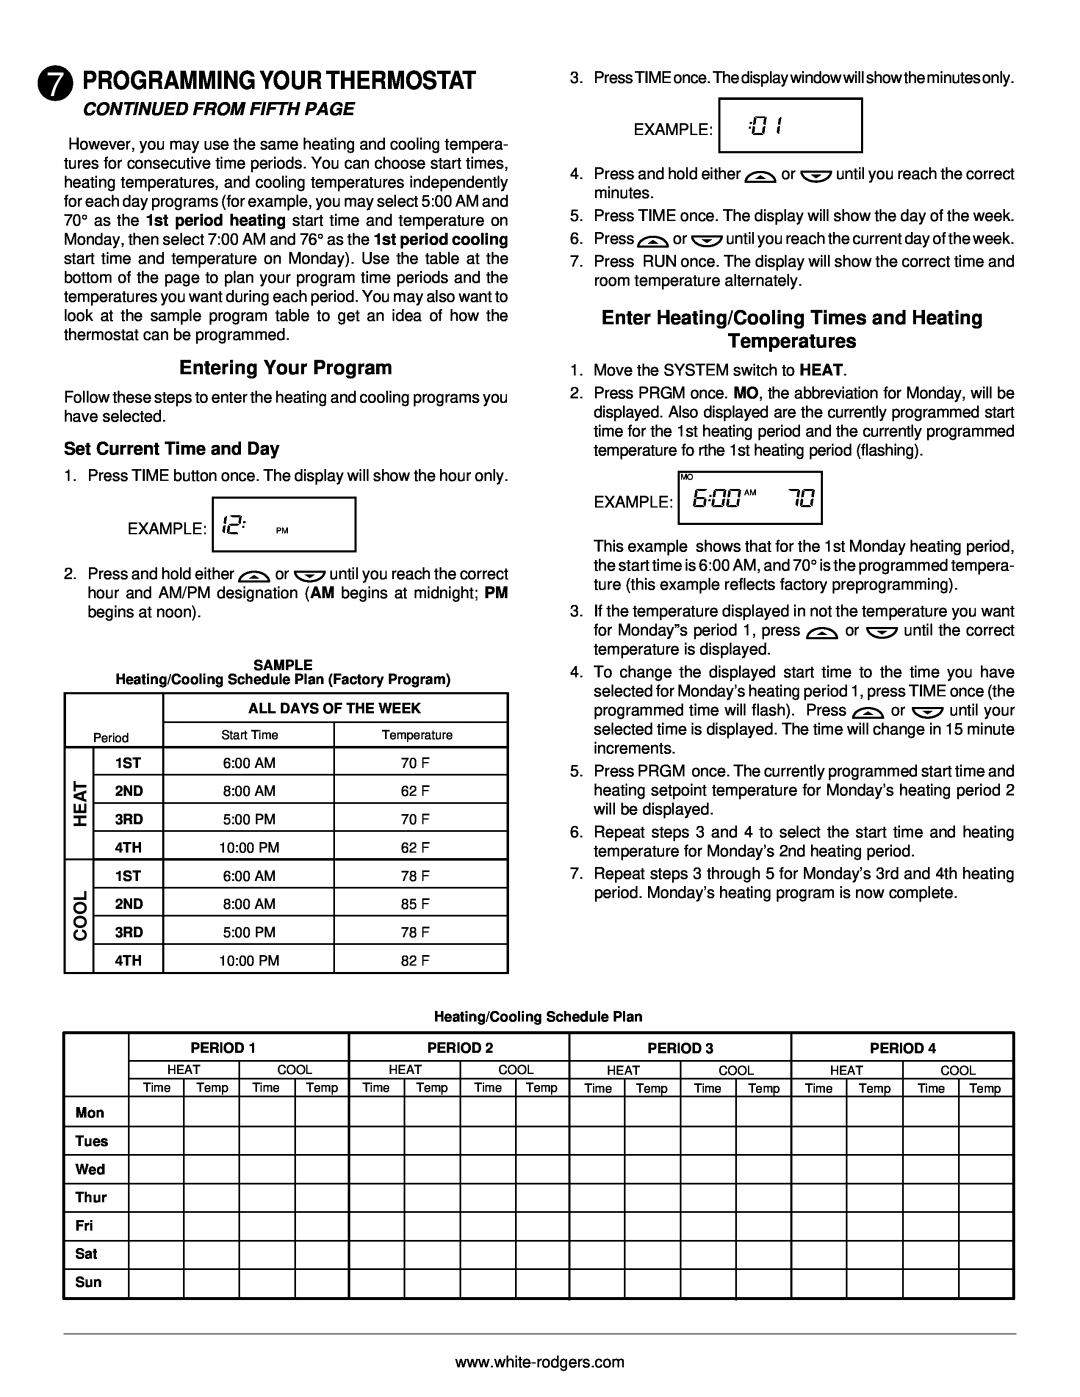 White Rodgers 775 Entering Your Program, Enter Heating/Cooling Times and Heating, Temperatures, Continued From Fifth Page 